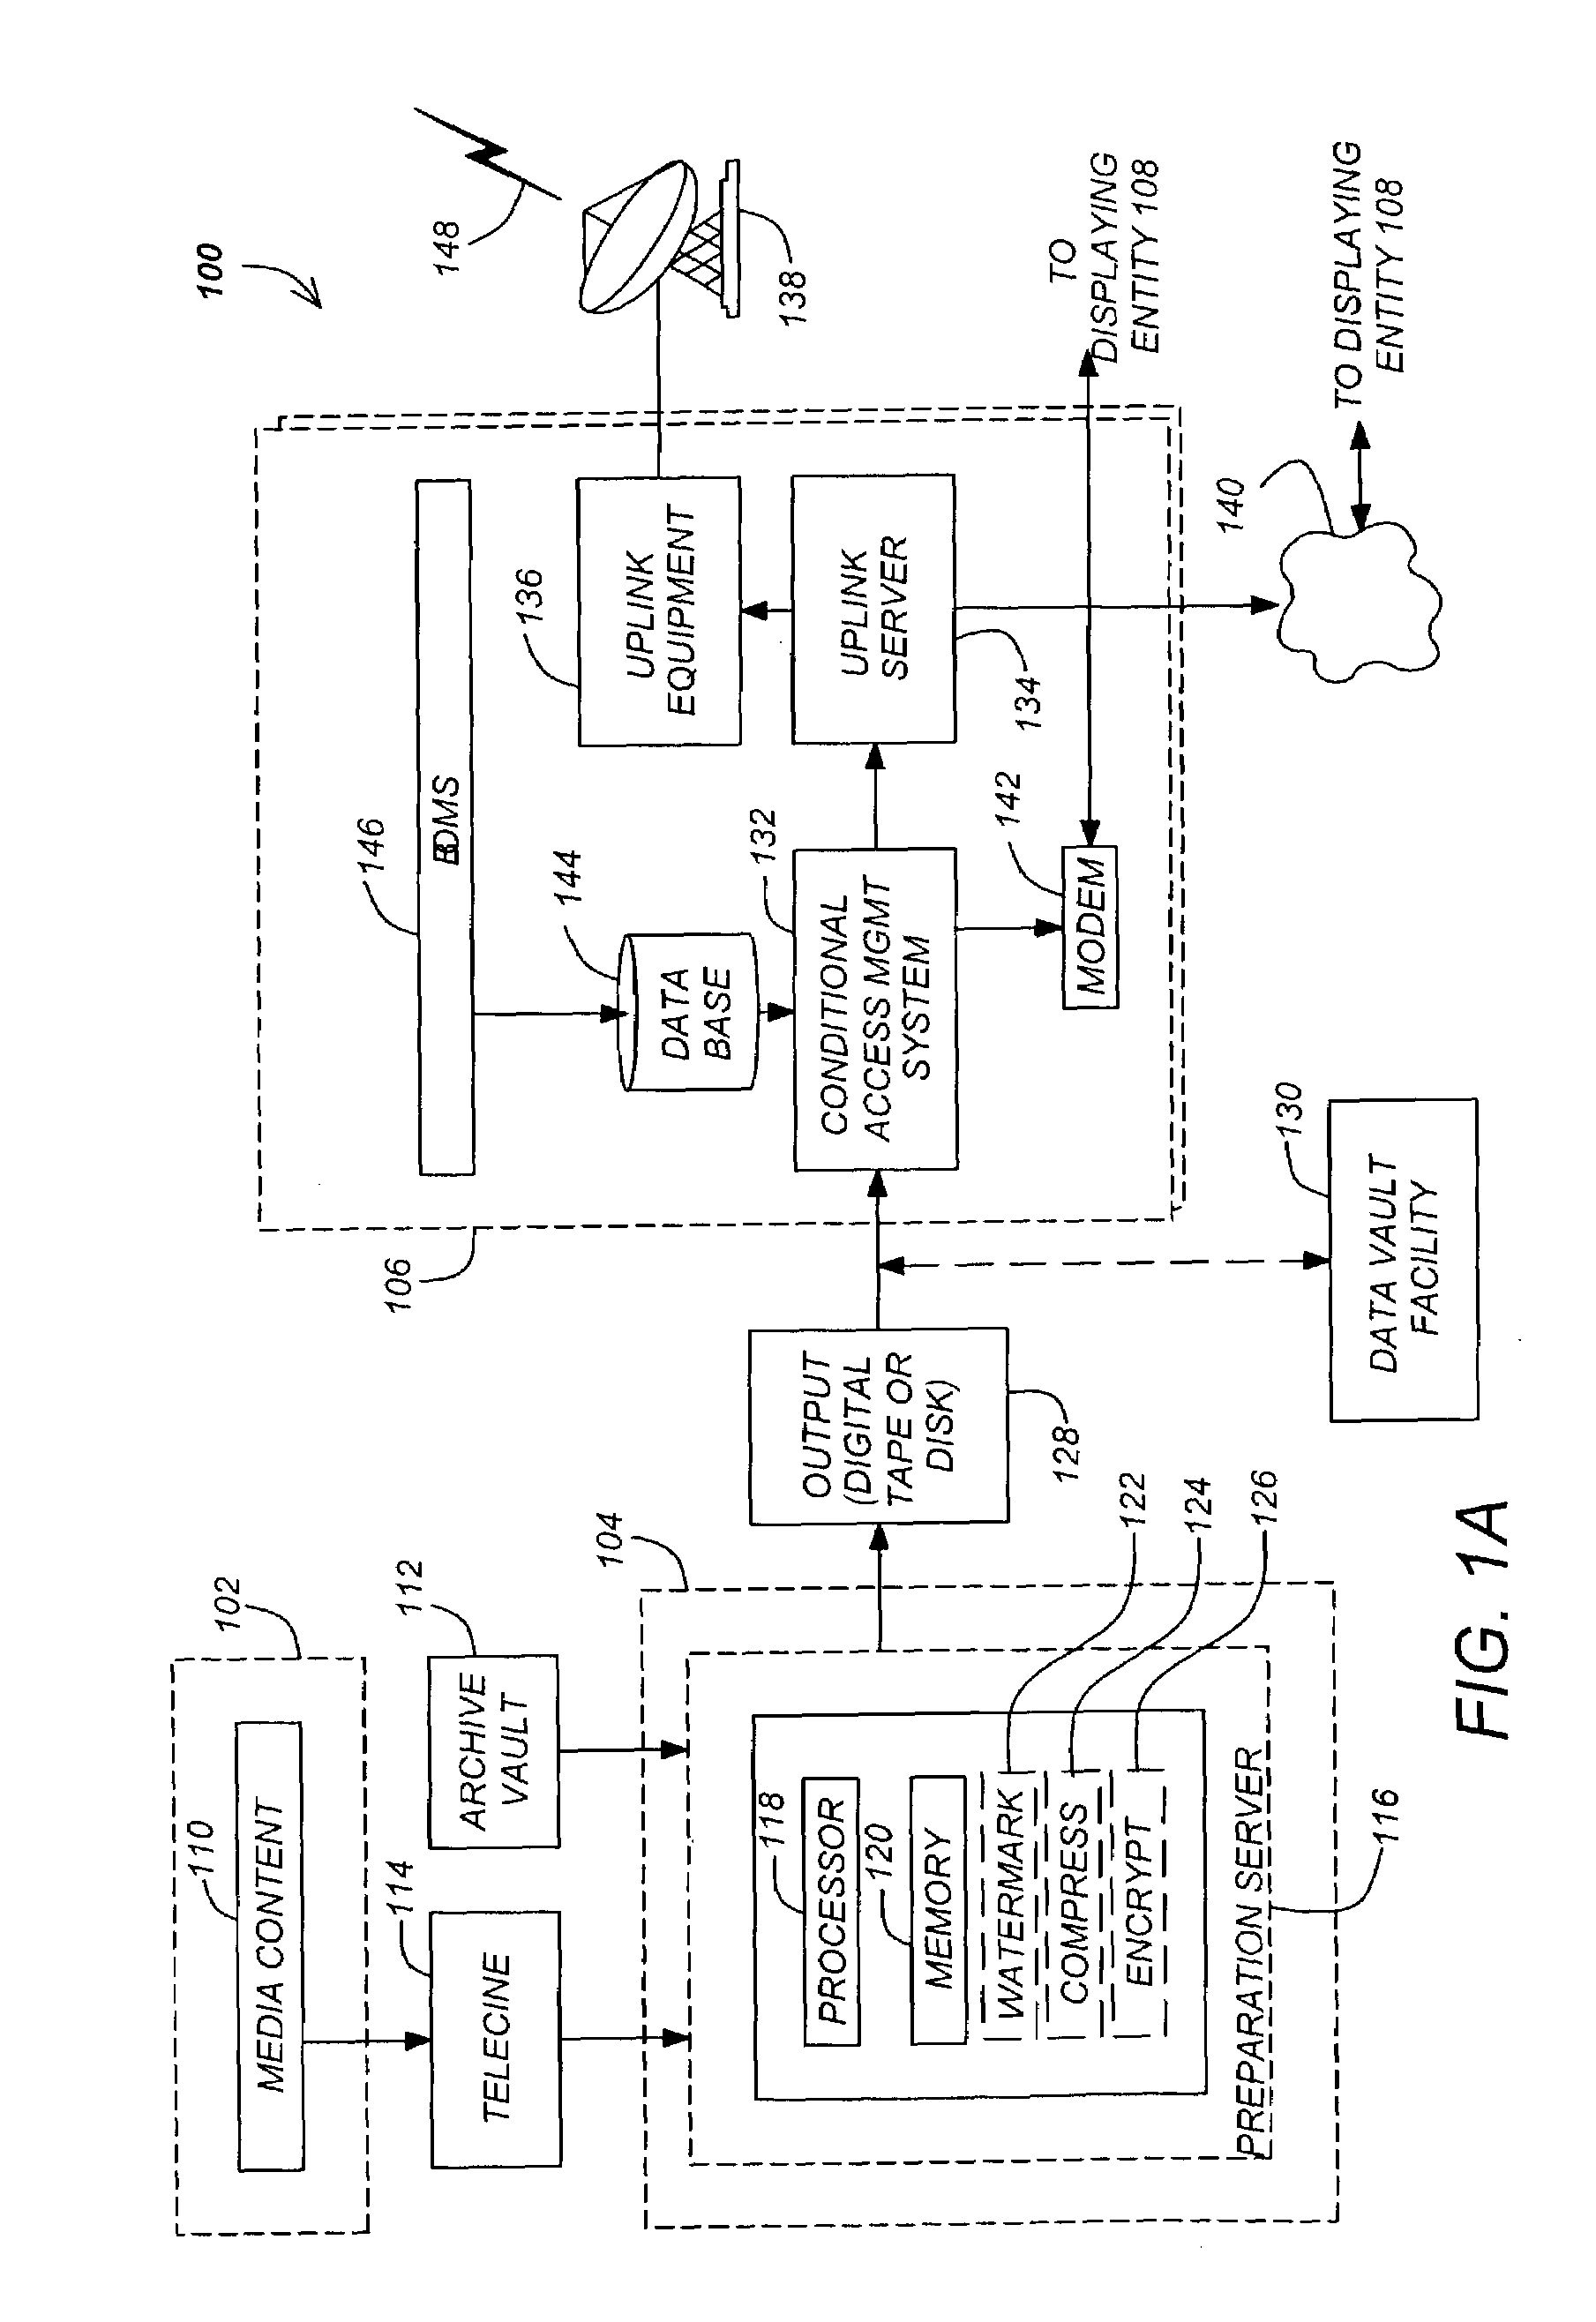 System and method for minimizing interference in a spot beam communication system